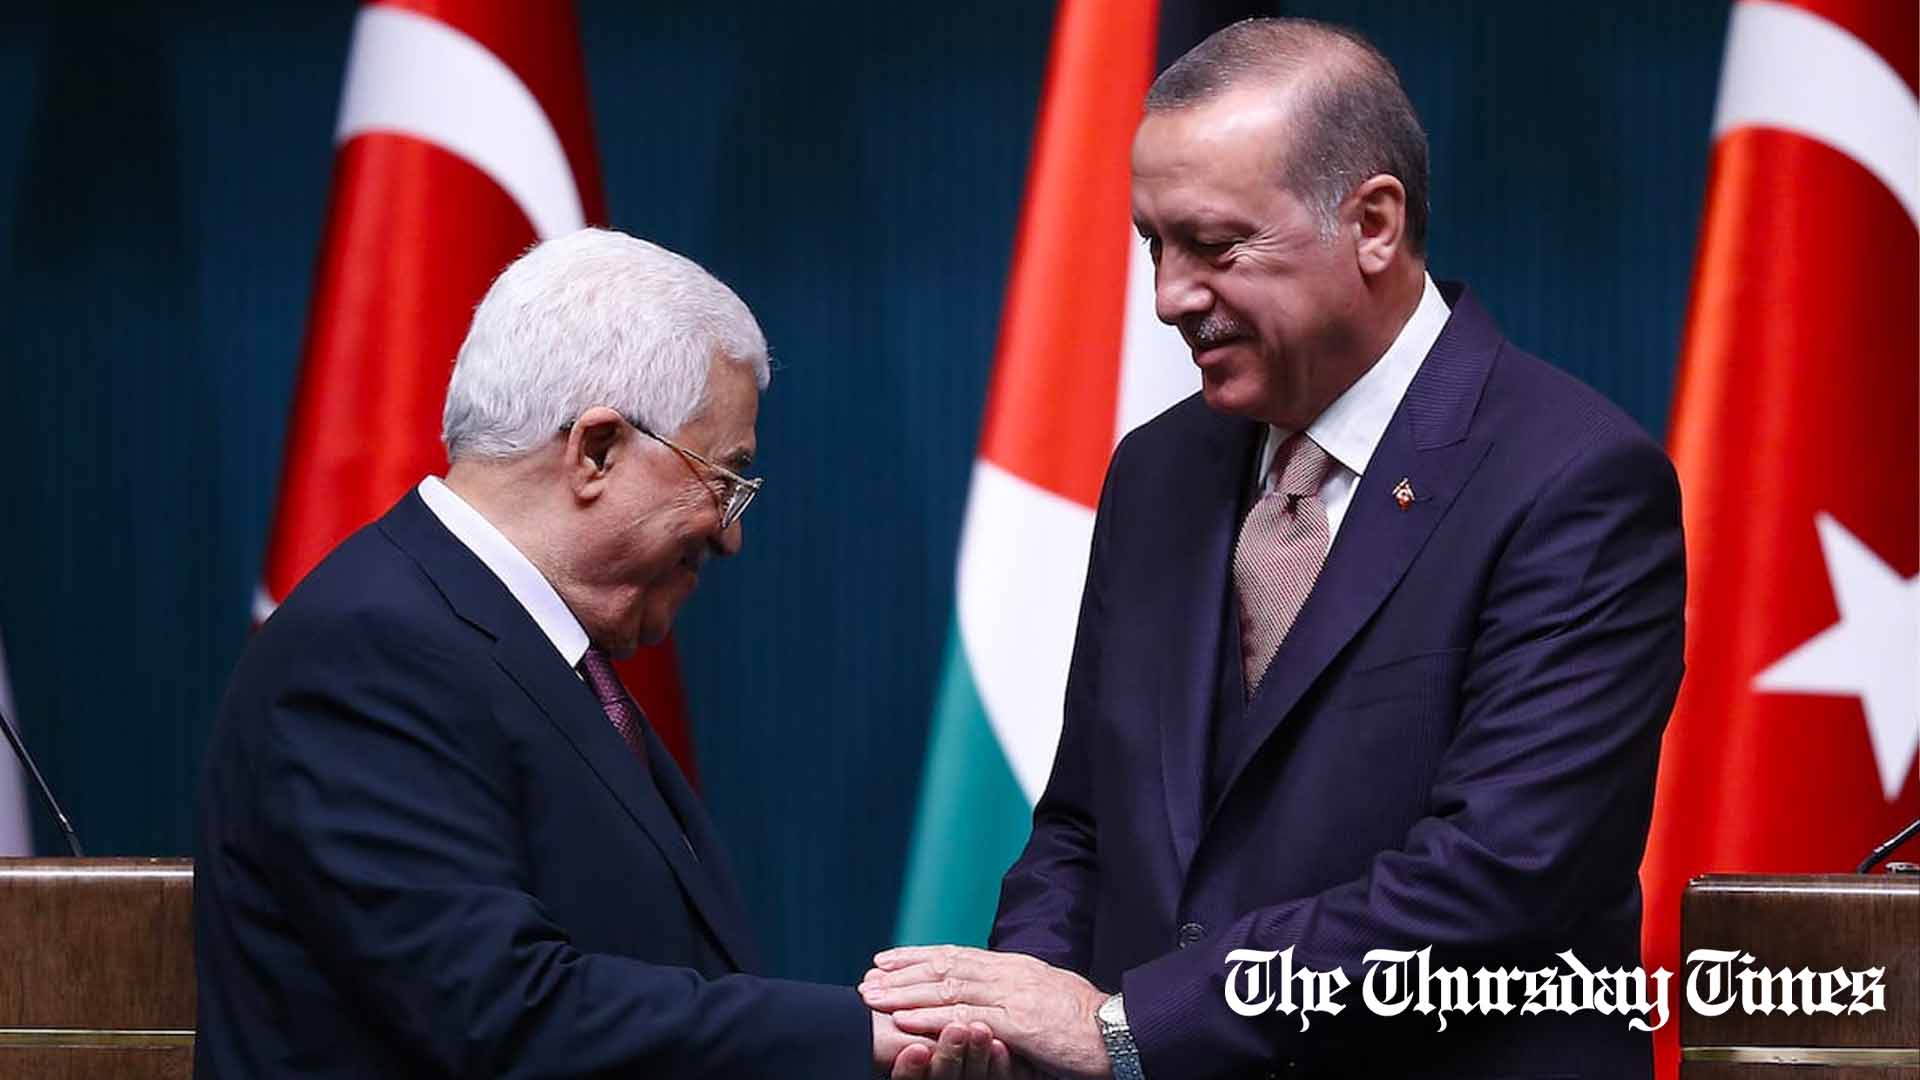 A file photo is shown of Palestinian president Mahmoud Abbas (L) with Turkish president Recep Tayyip Erdoğan (R). — FILE/THE THURSDAY TIMES